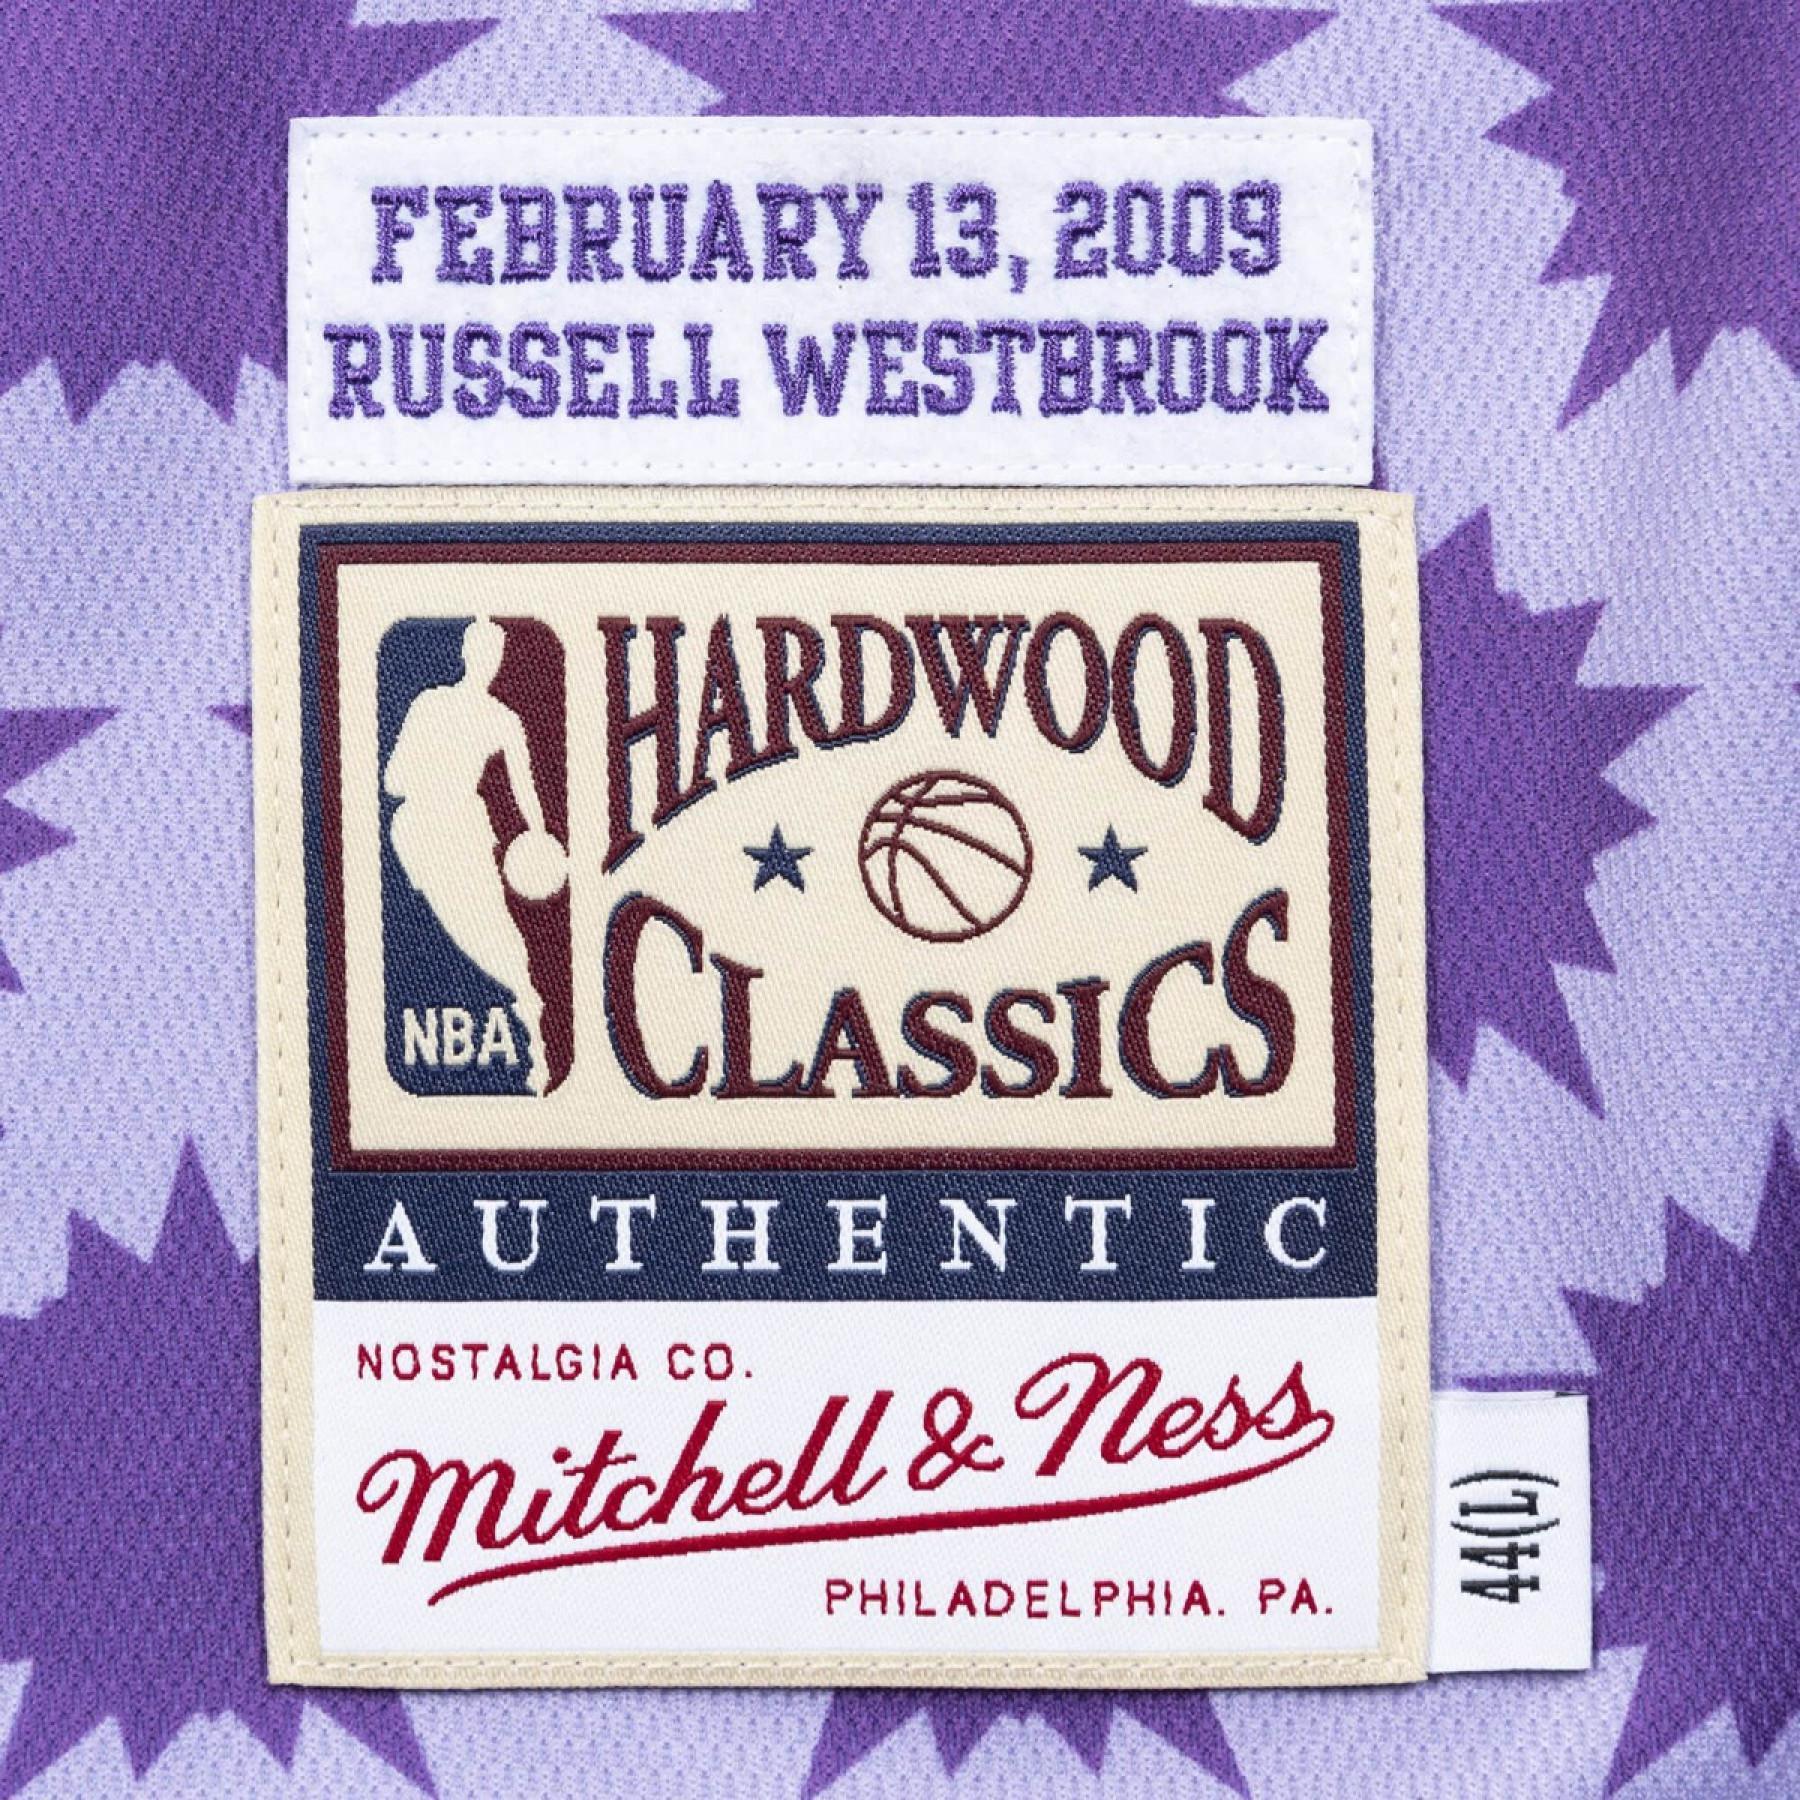 Authentic nba jersey russell westbrook rookie game 2009